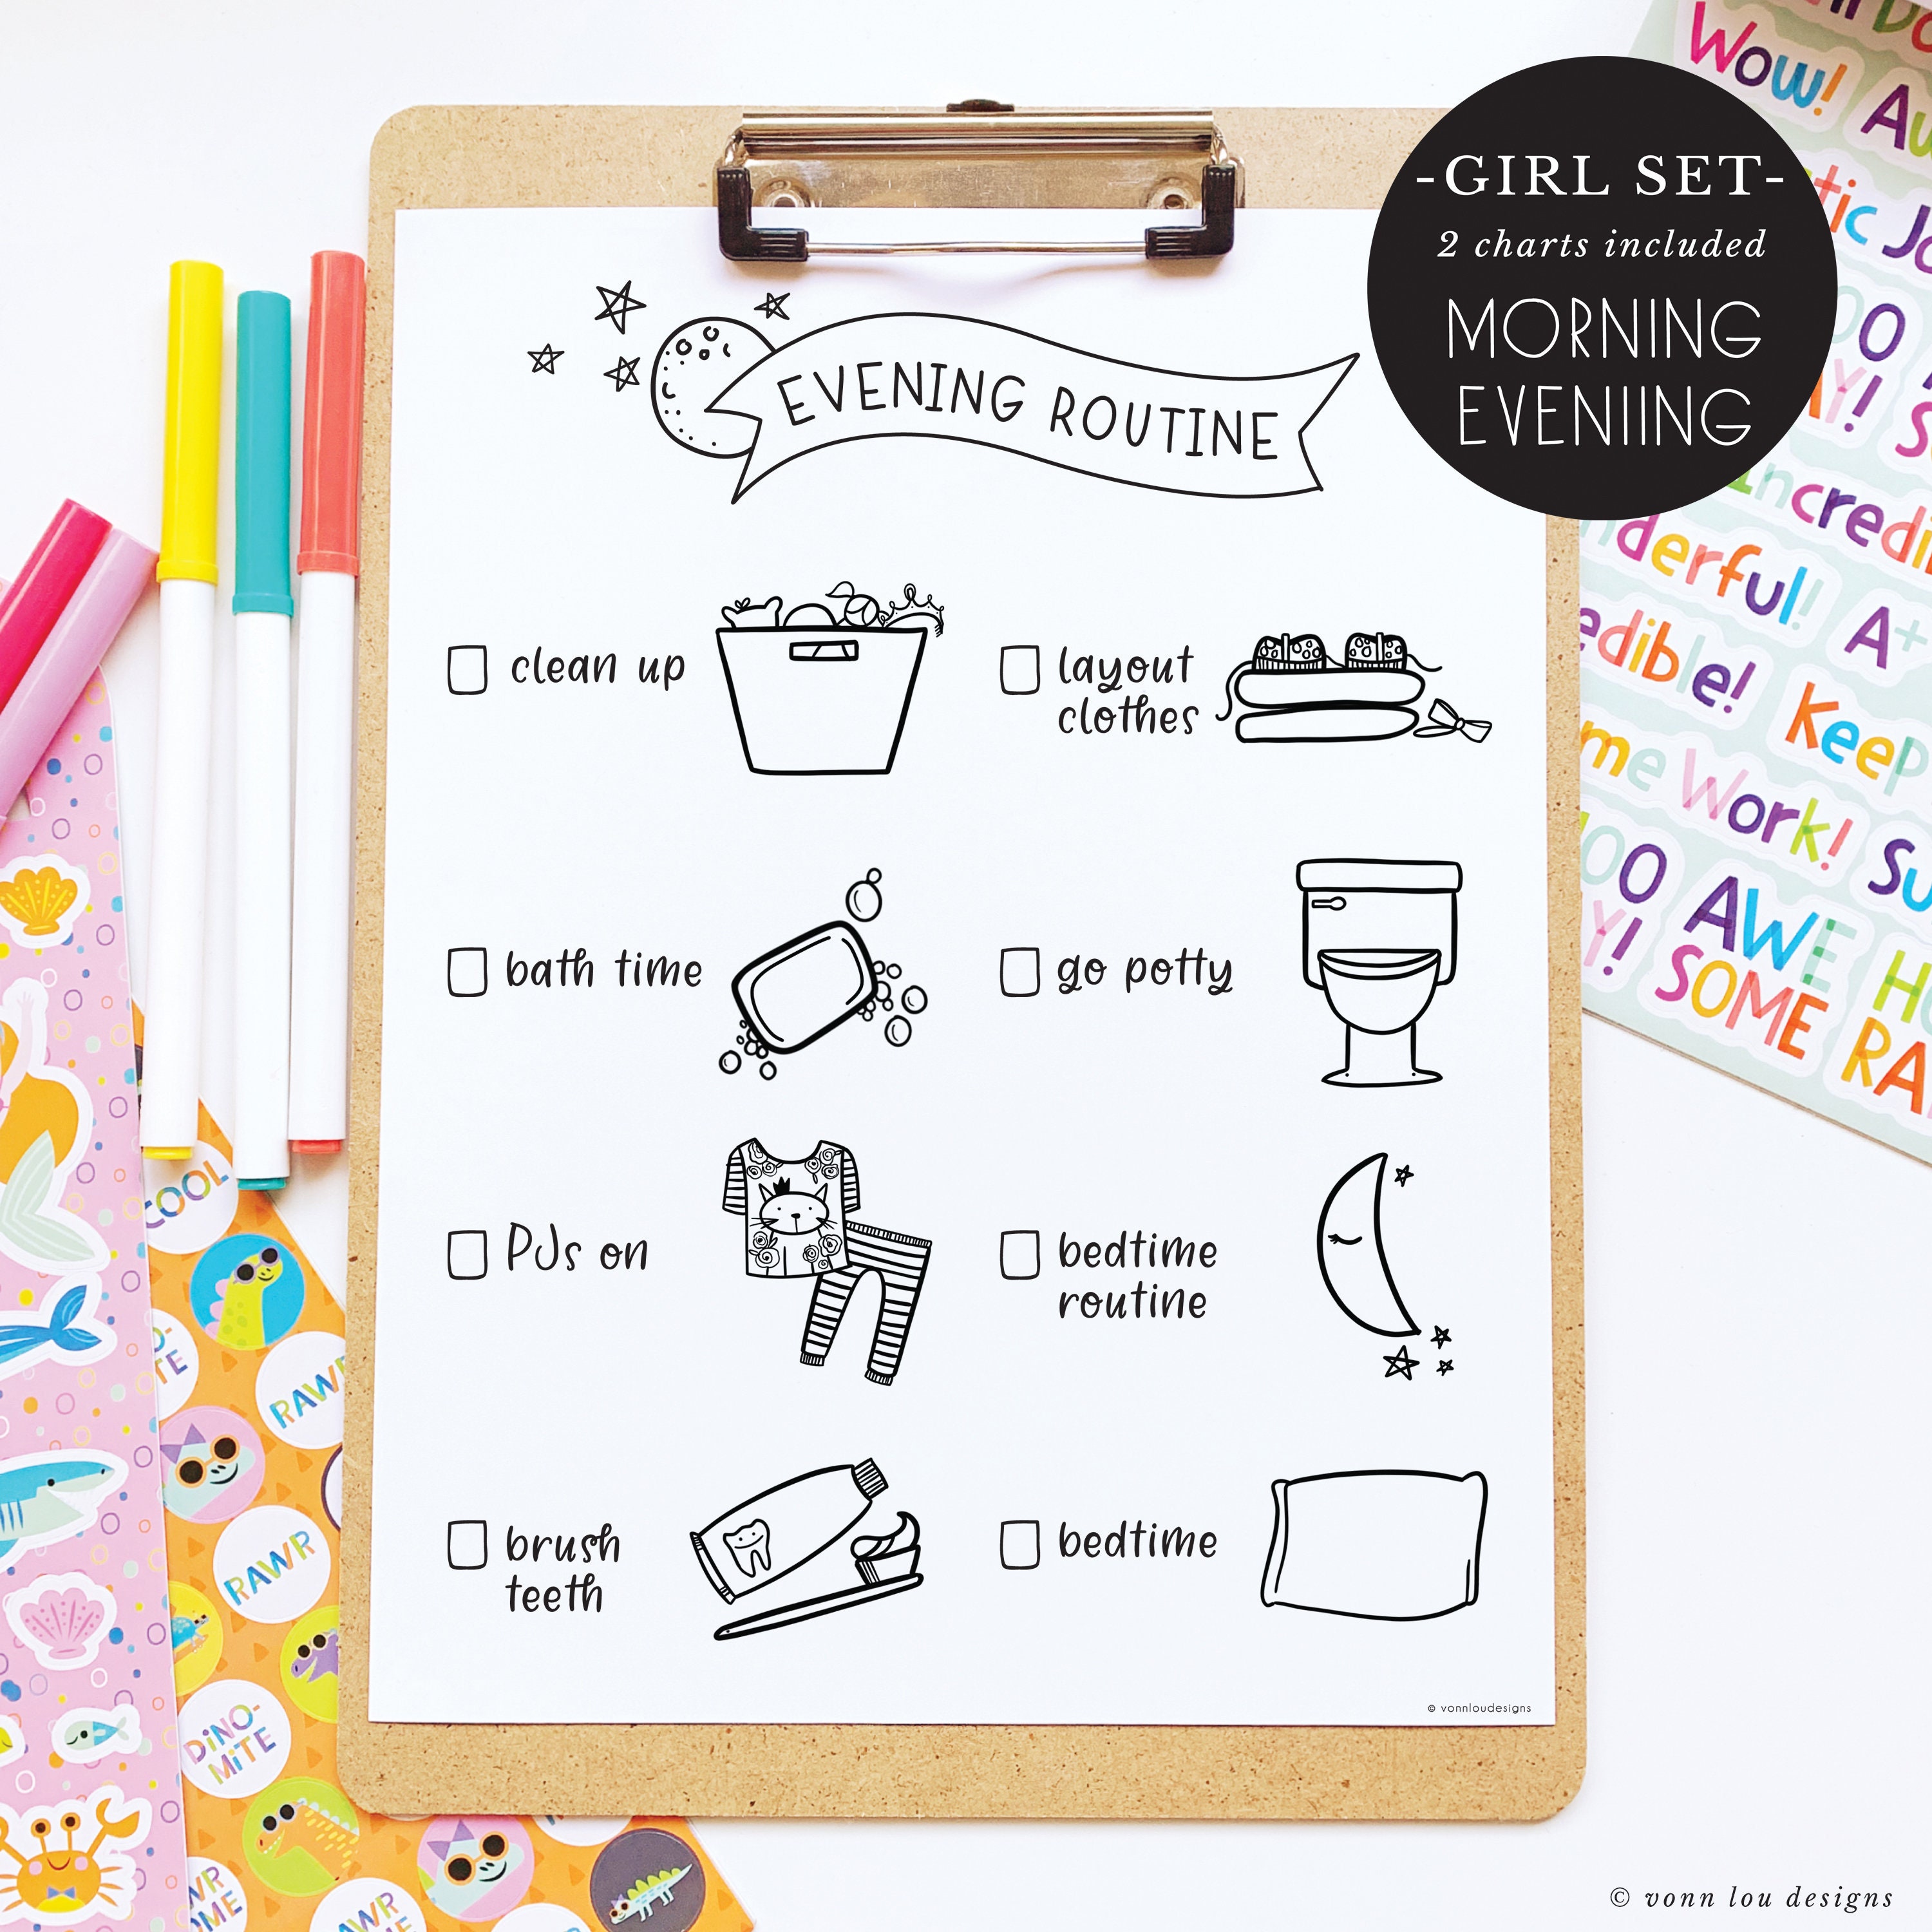 chore chart instant printable diy morning jobs evening etsy norway